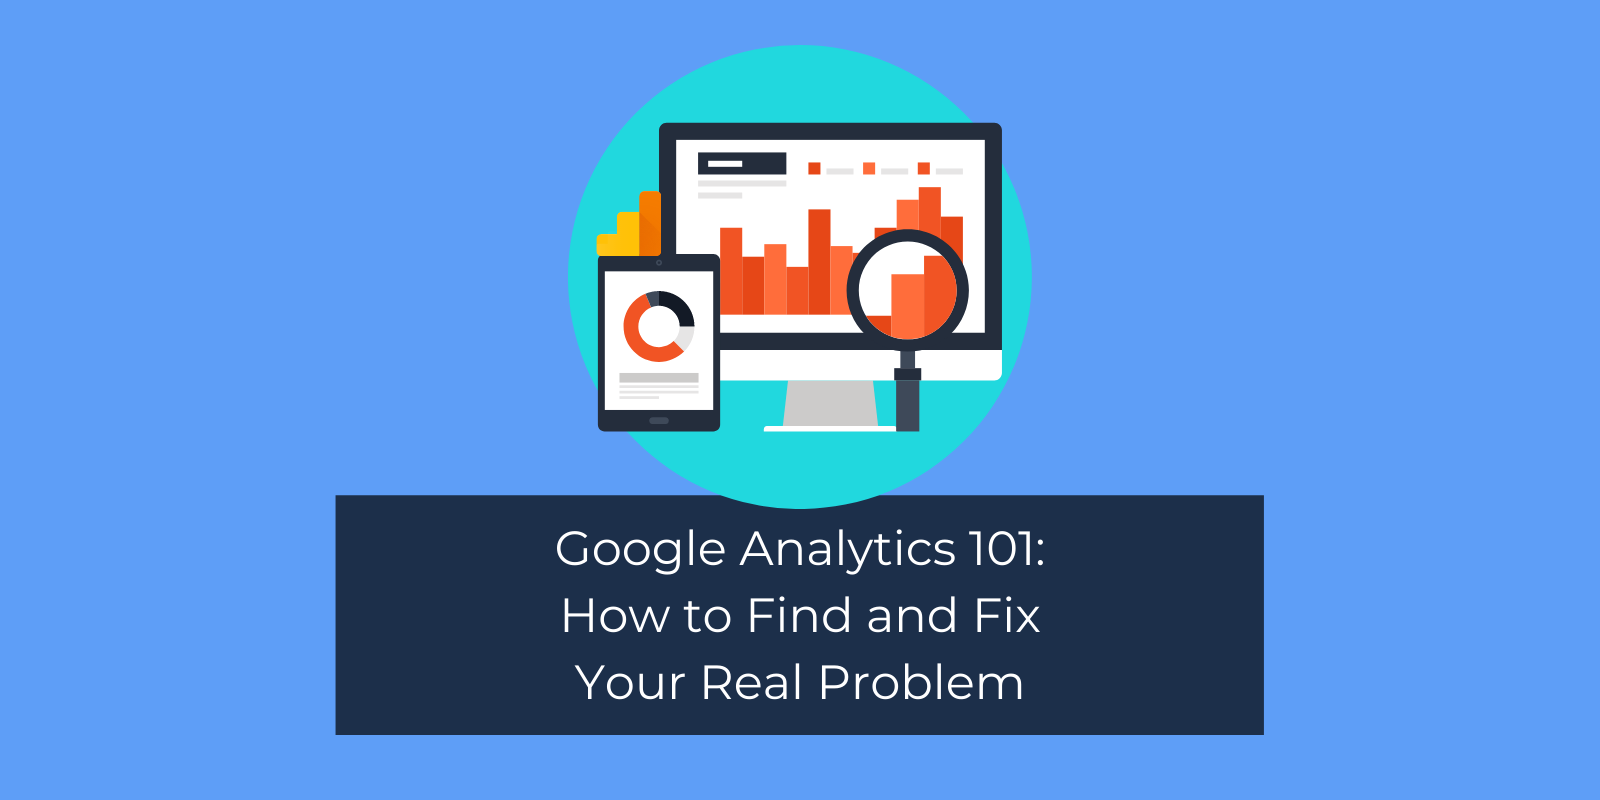 Google Analytics 101: How to Find and Fix Your Real Problem